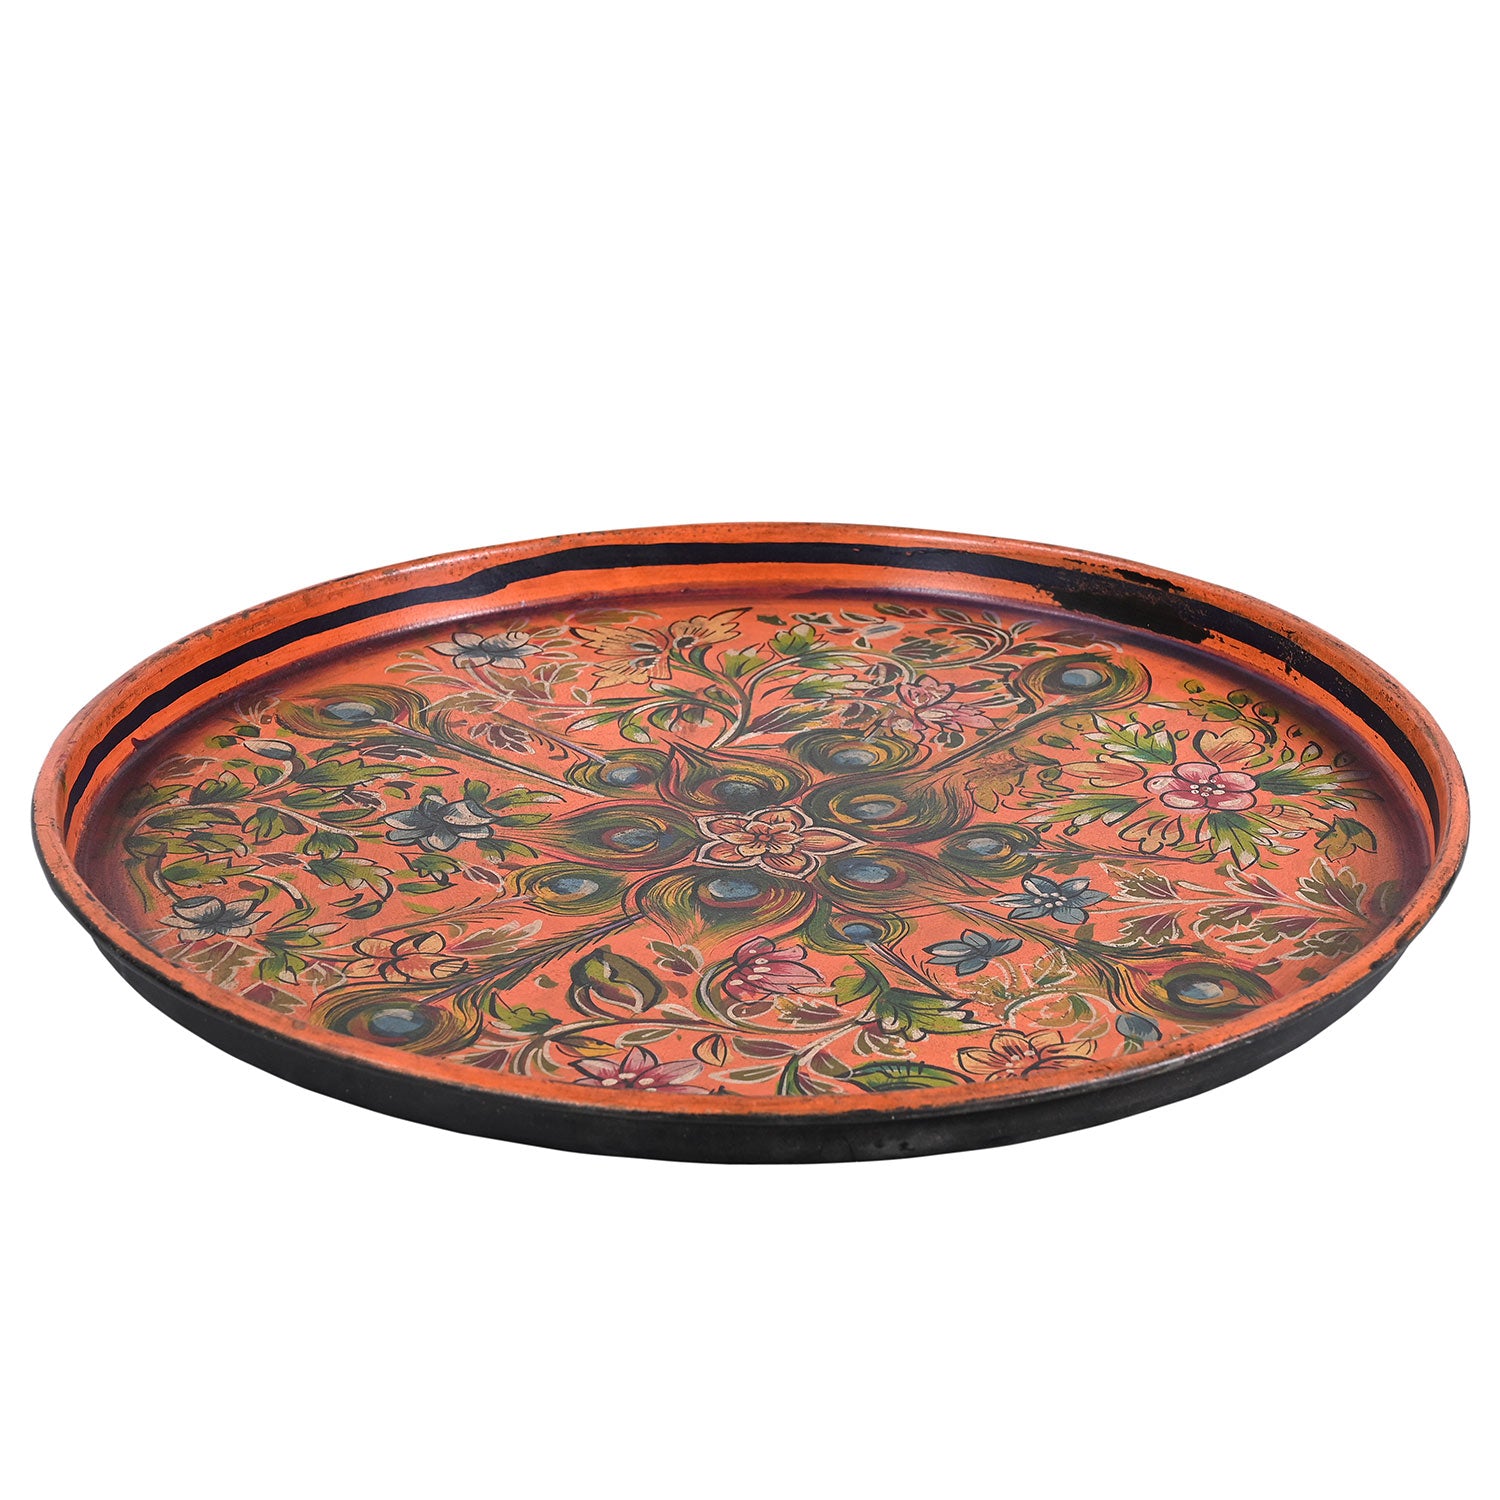 AntiqueFarmHouse - Where would you style our ROUND TRAY WITH